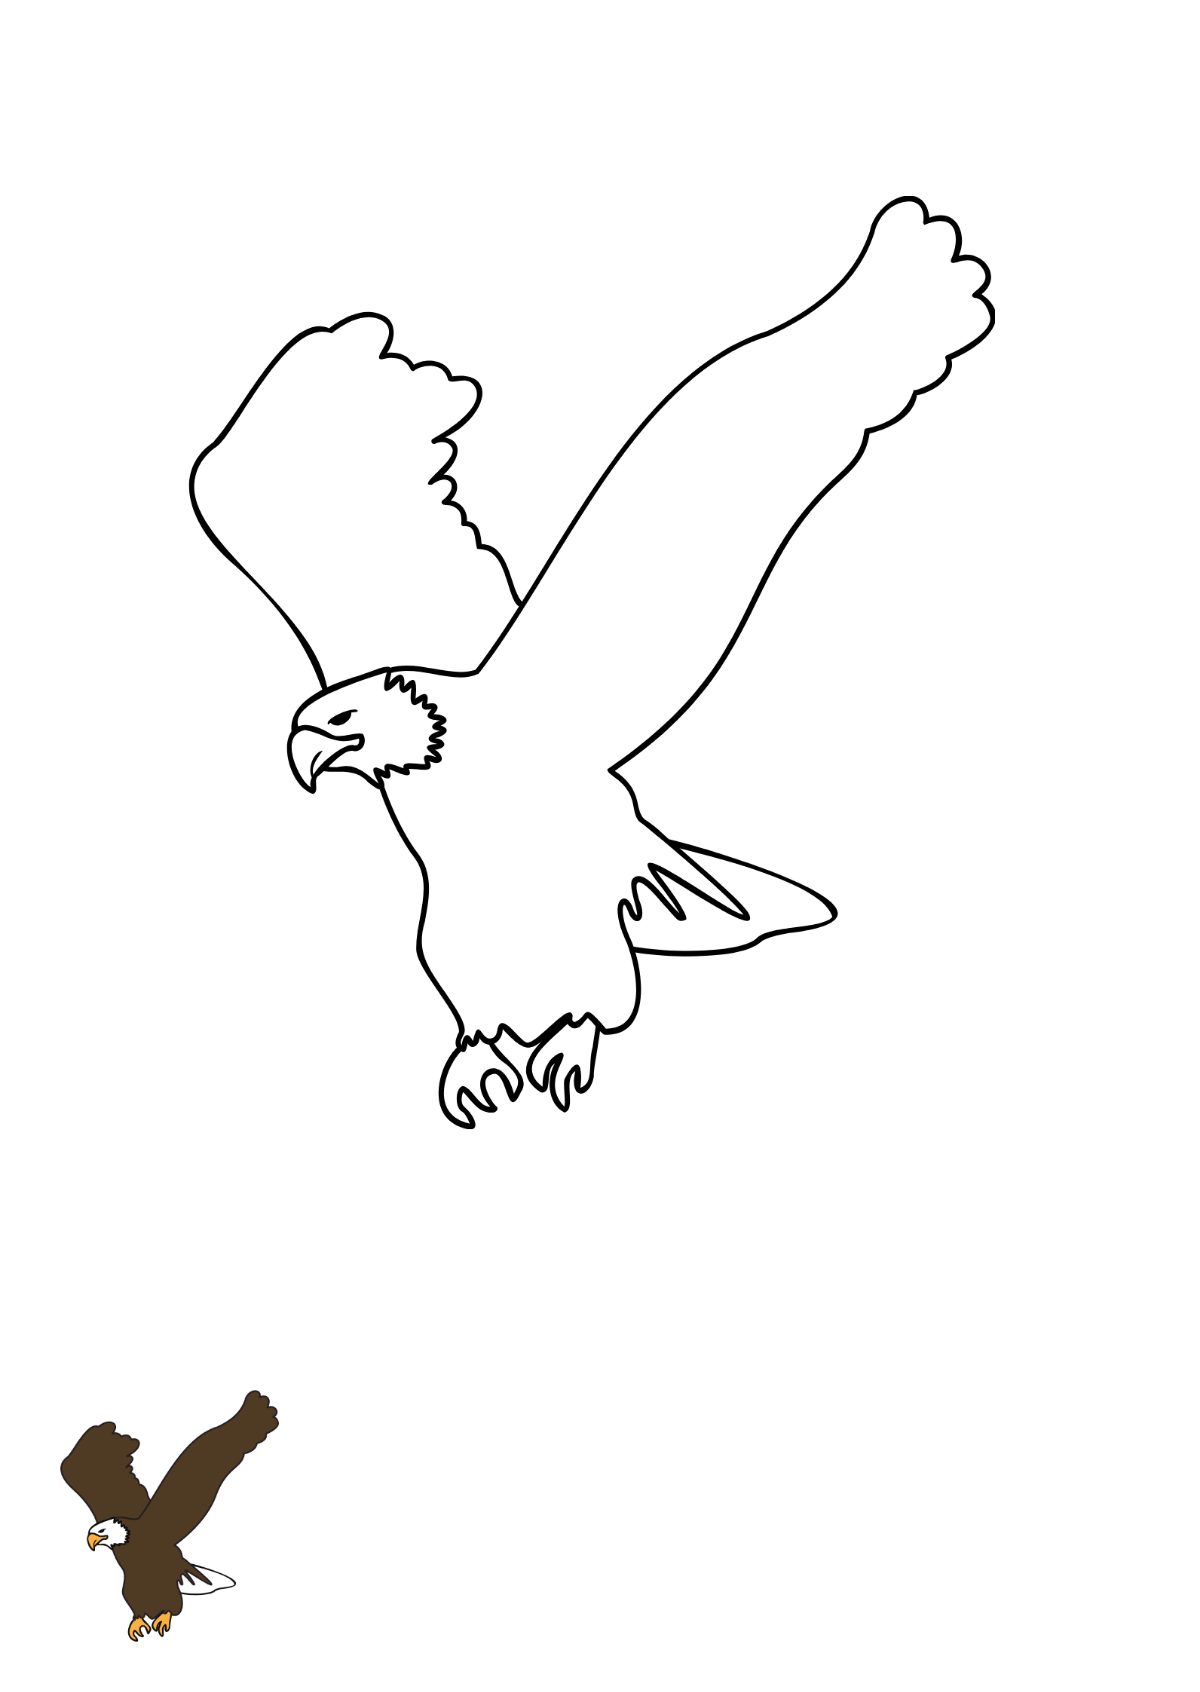 Winged Eagle coloring page Template